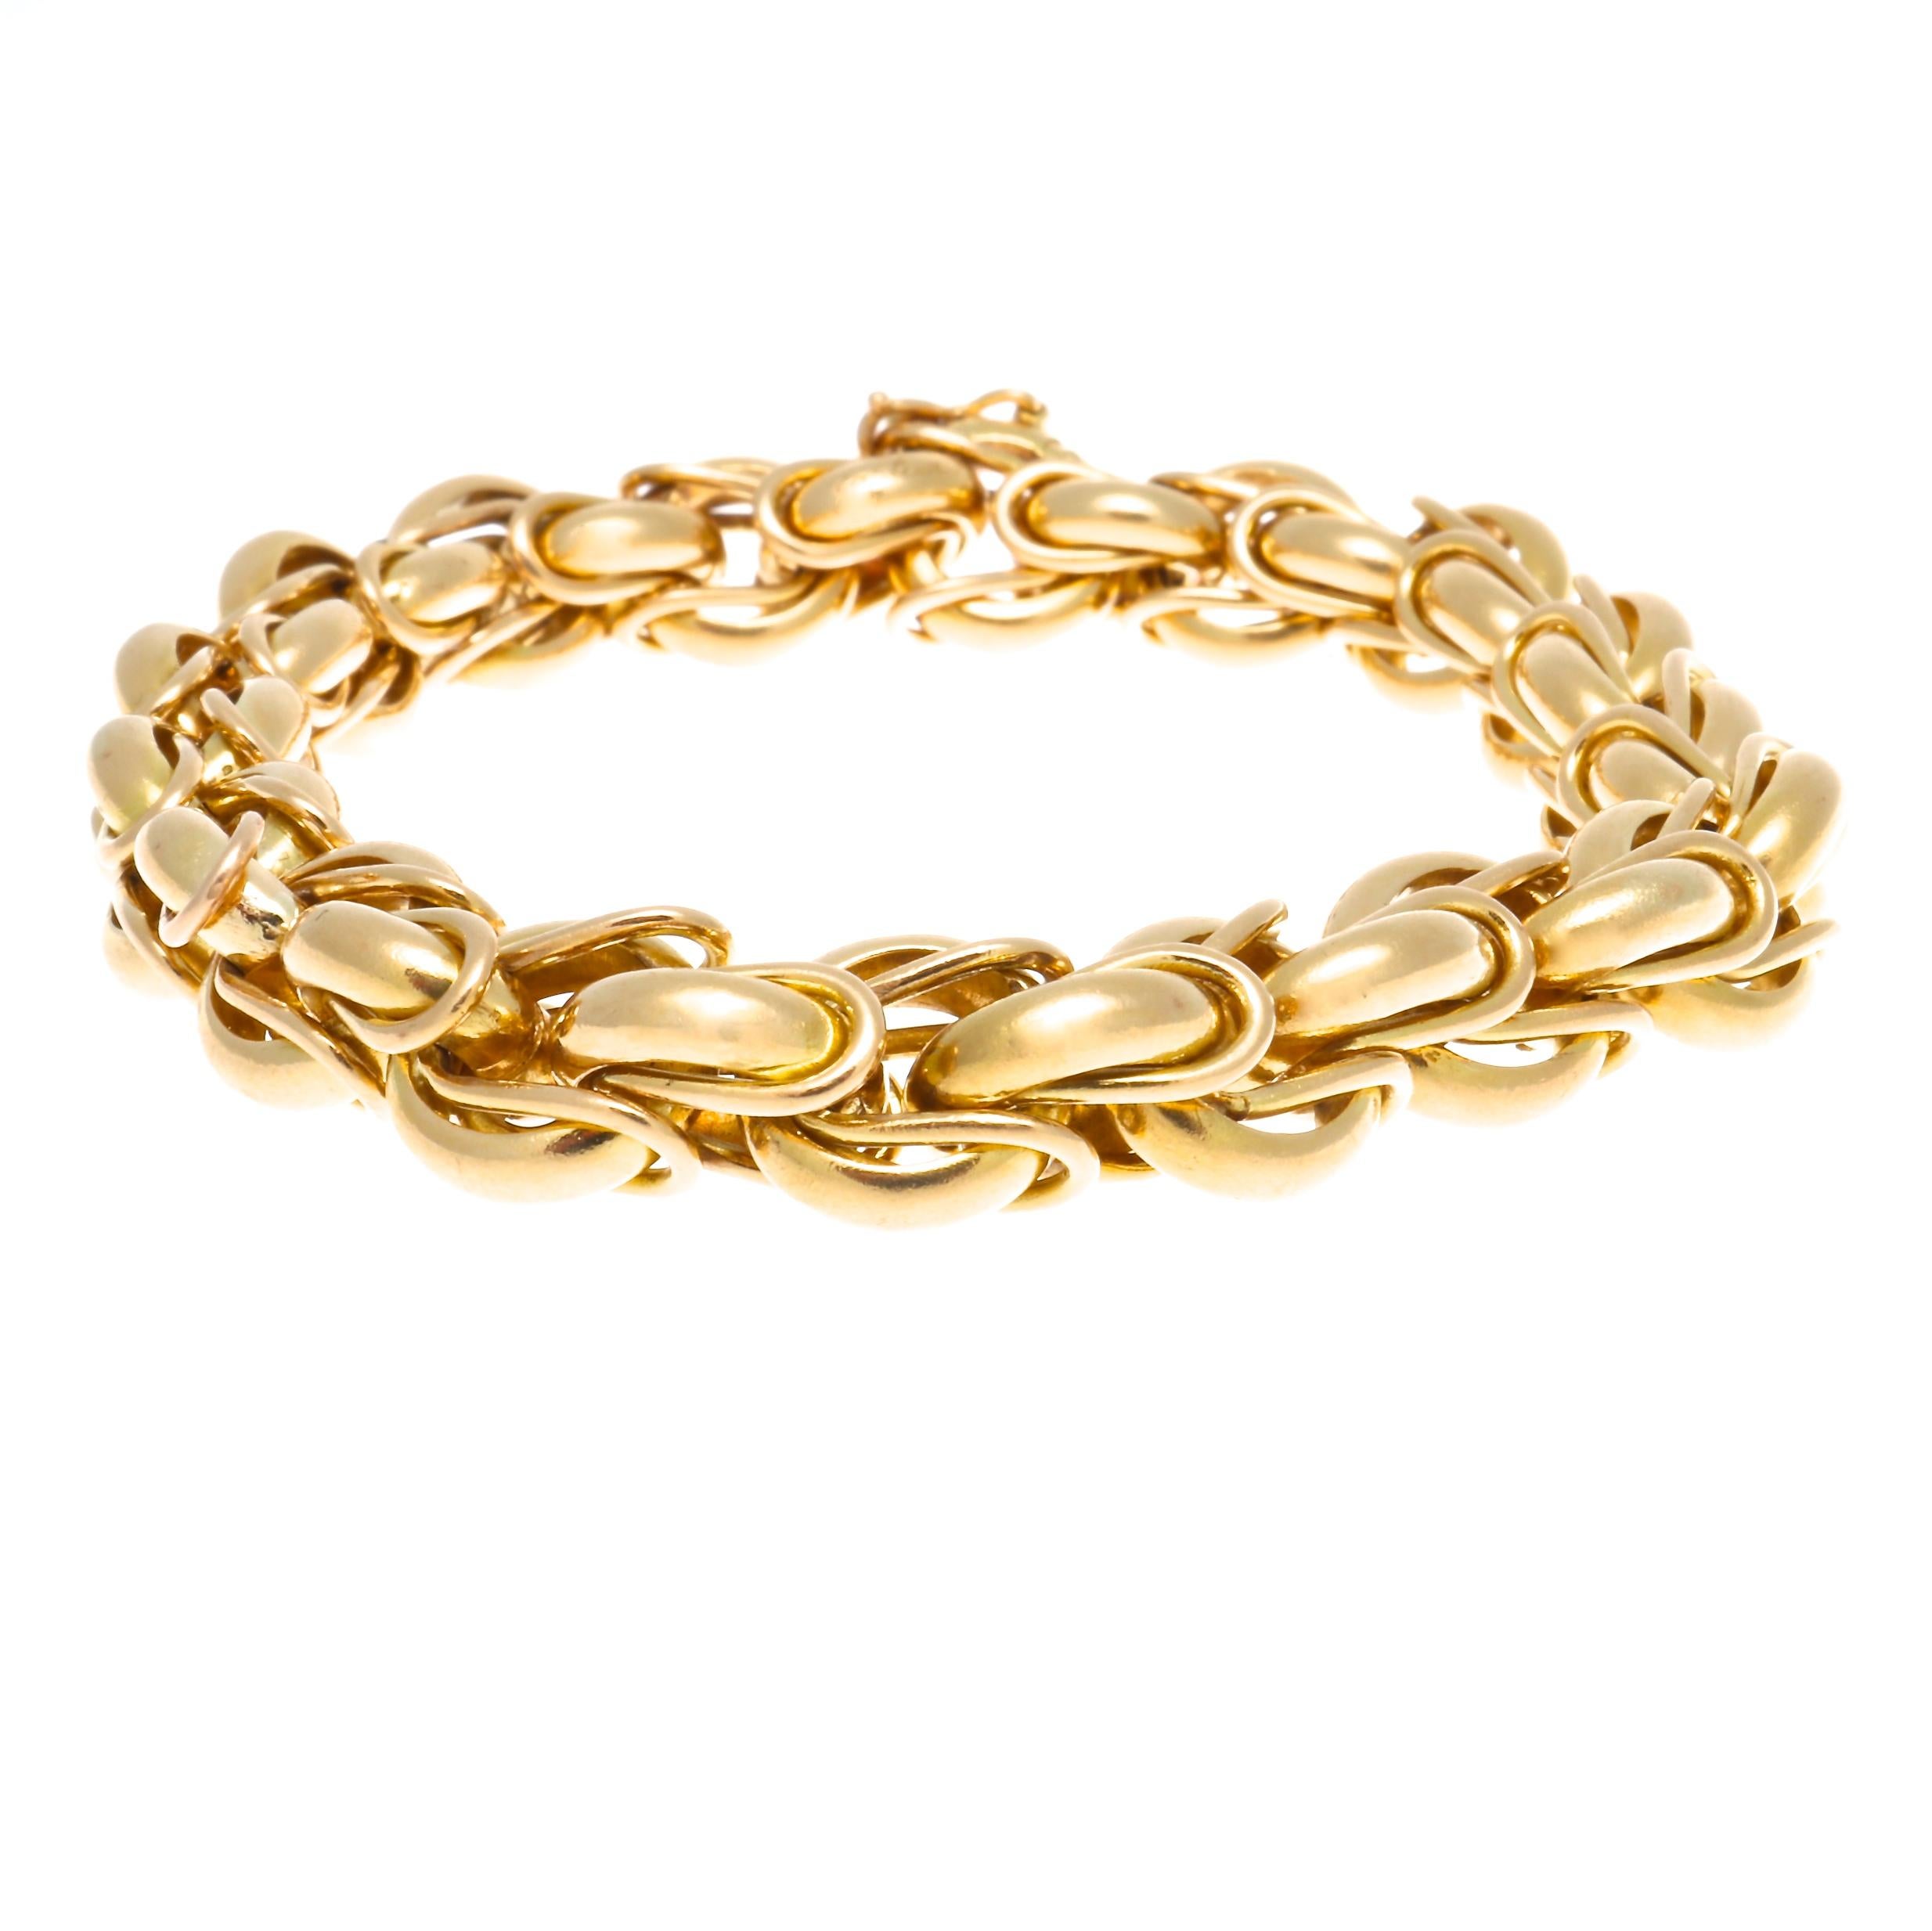 Avant garde, yet sophisticated and elegant design is what has kept Cartier relevant for centuries and cemented their place at the  top of the jewelry world. Featuring interlocking links of glistening 18k gold gently rolling over one after another.